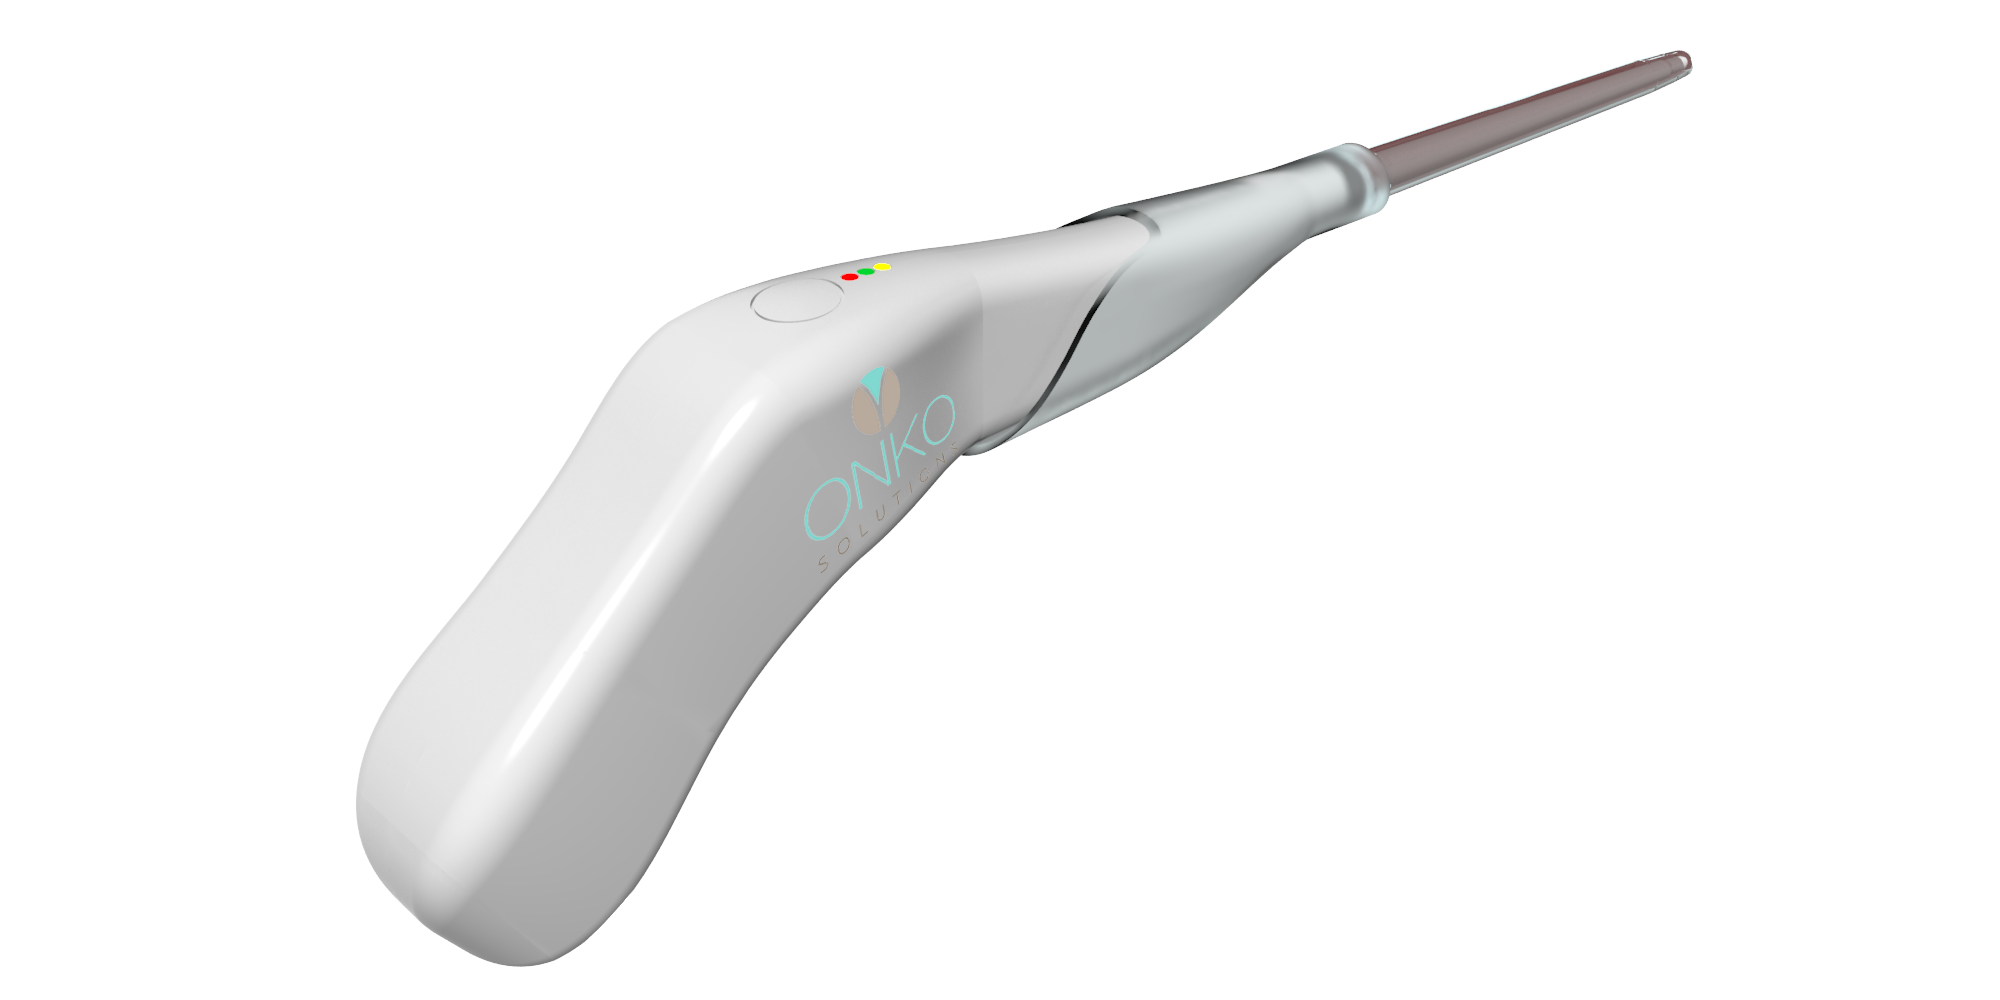 Portable device for early detection of  cervical cancer that provides immediate results using Biophotonics and Bioimpedance.